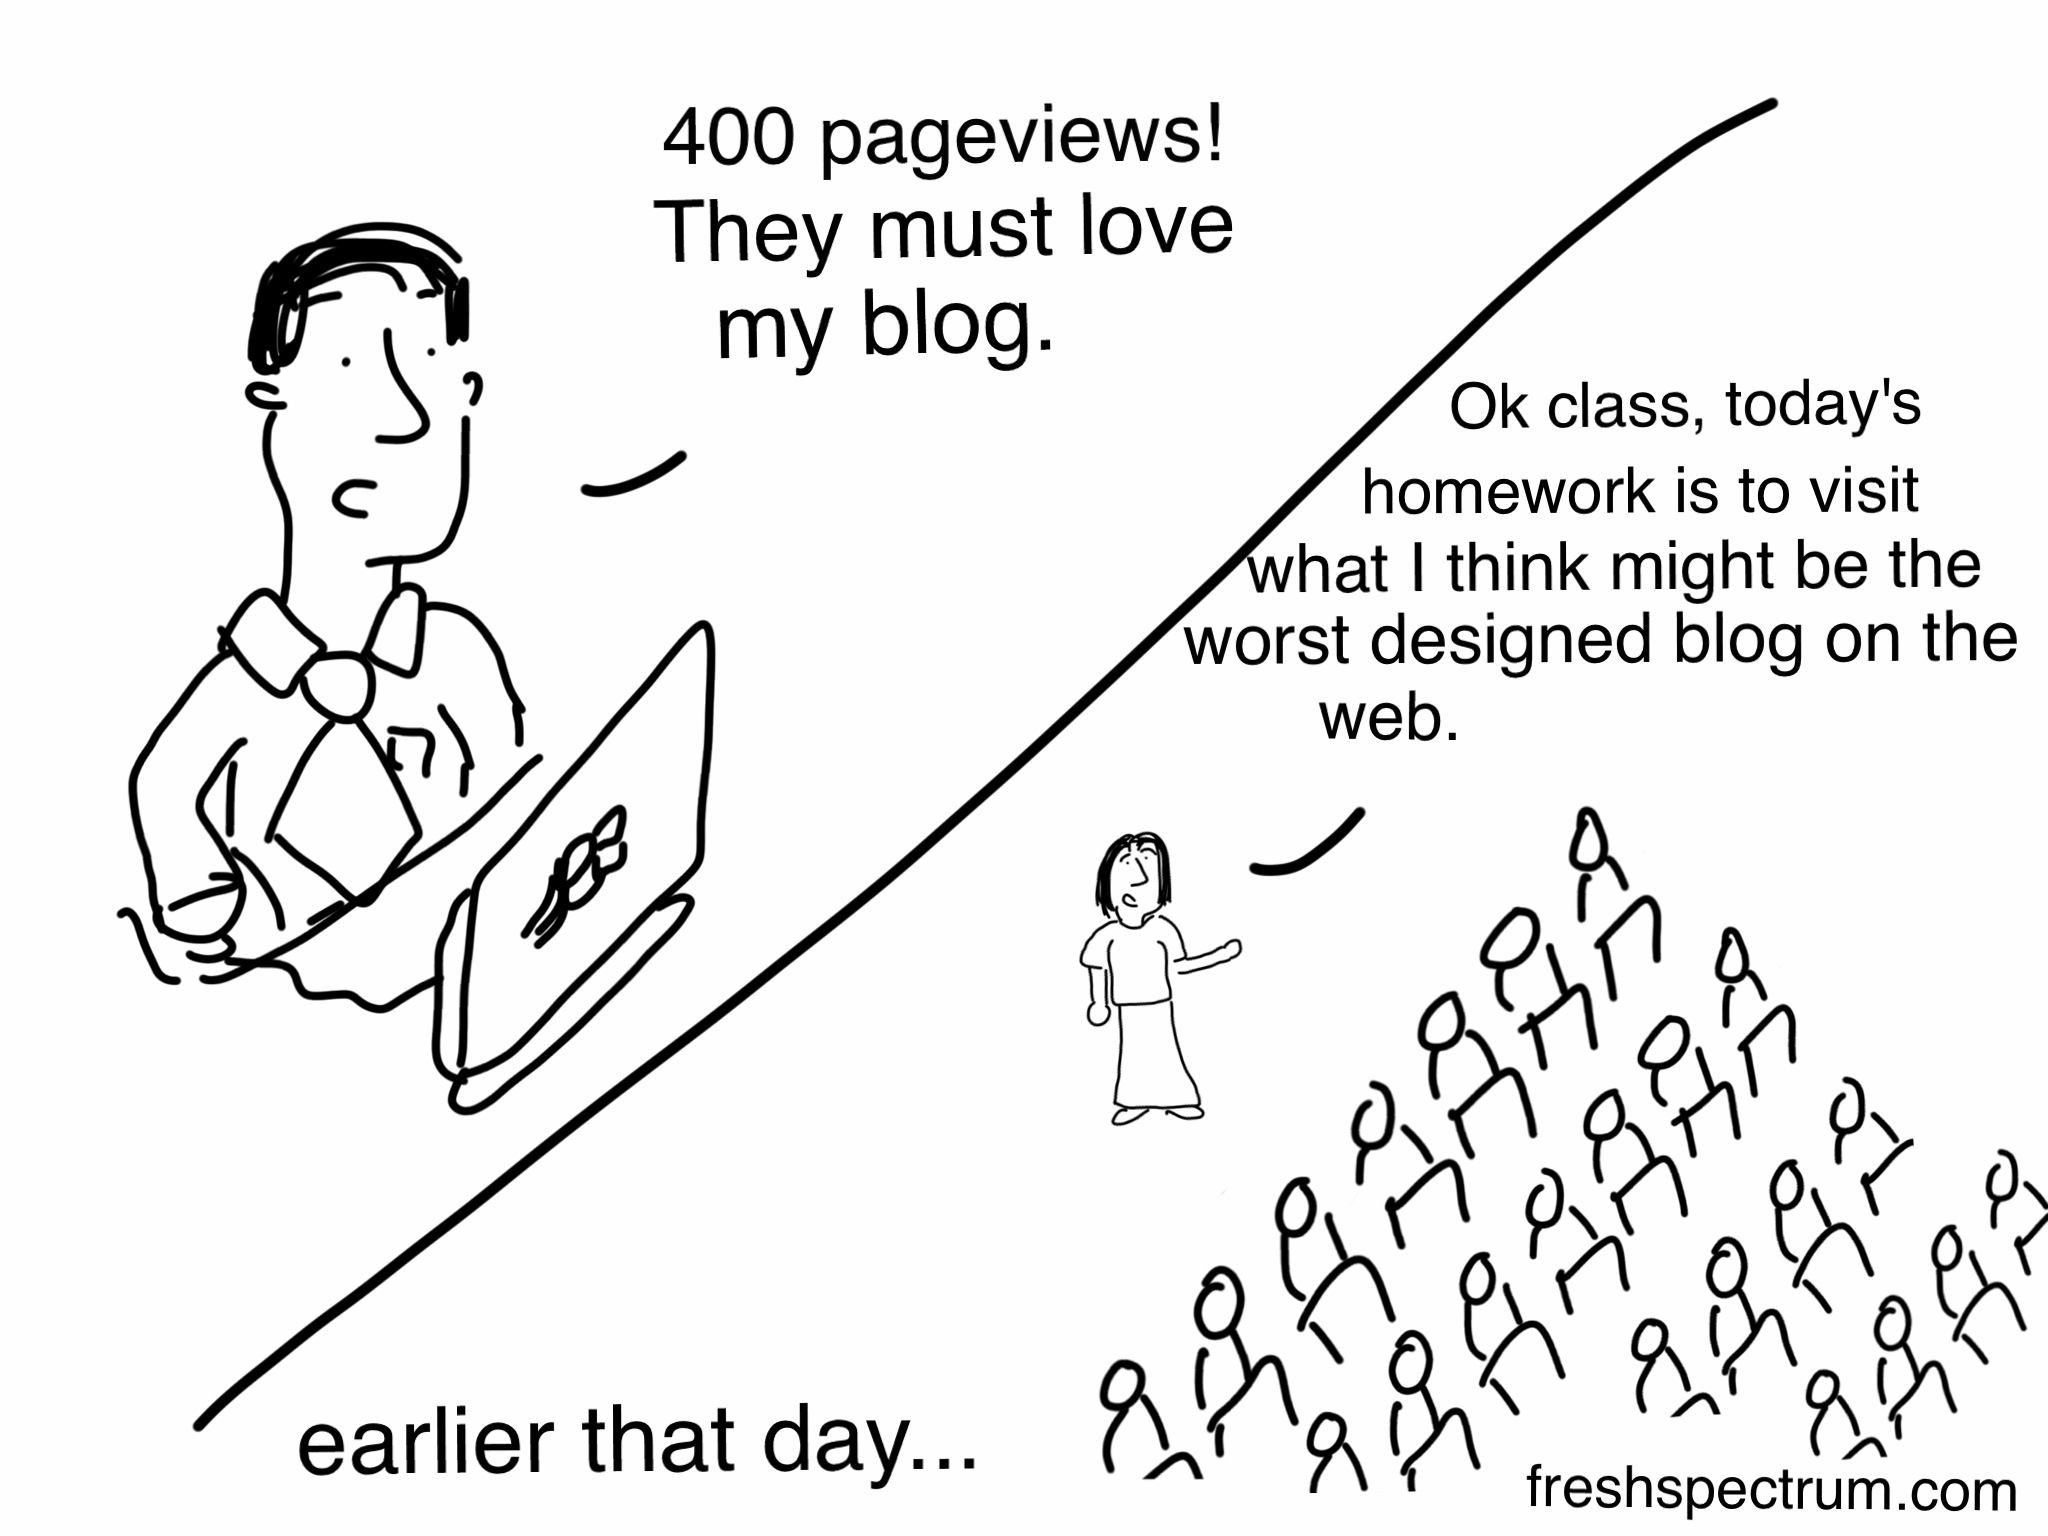 400 pageviews! They must love my blog. Elsewhere, "Ok class, today's homework is to visit what I think might be the worst designed blog on the web.